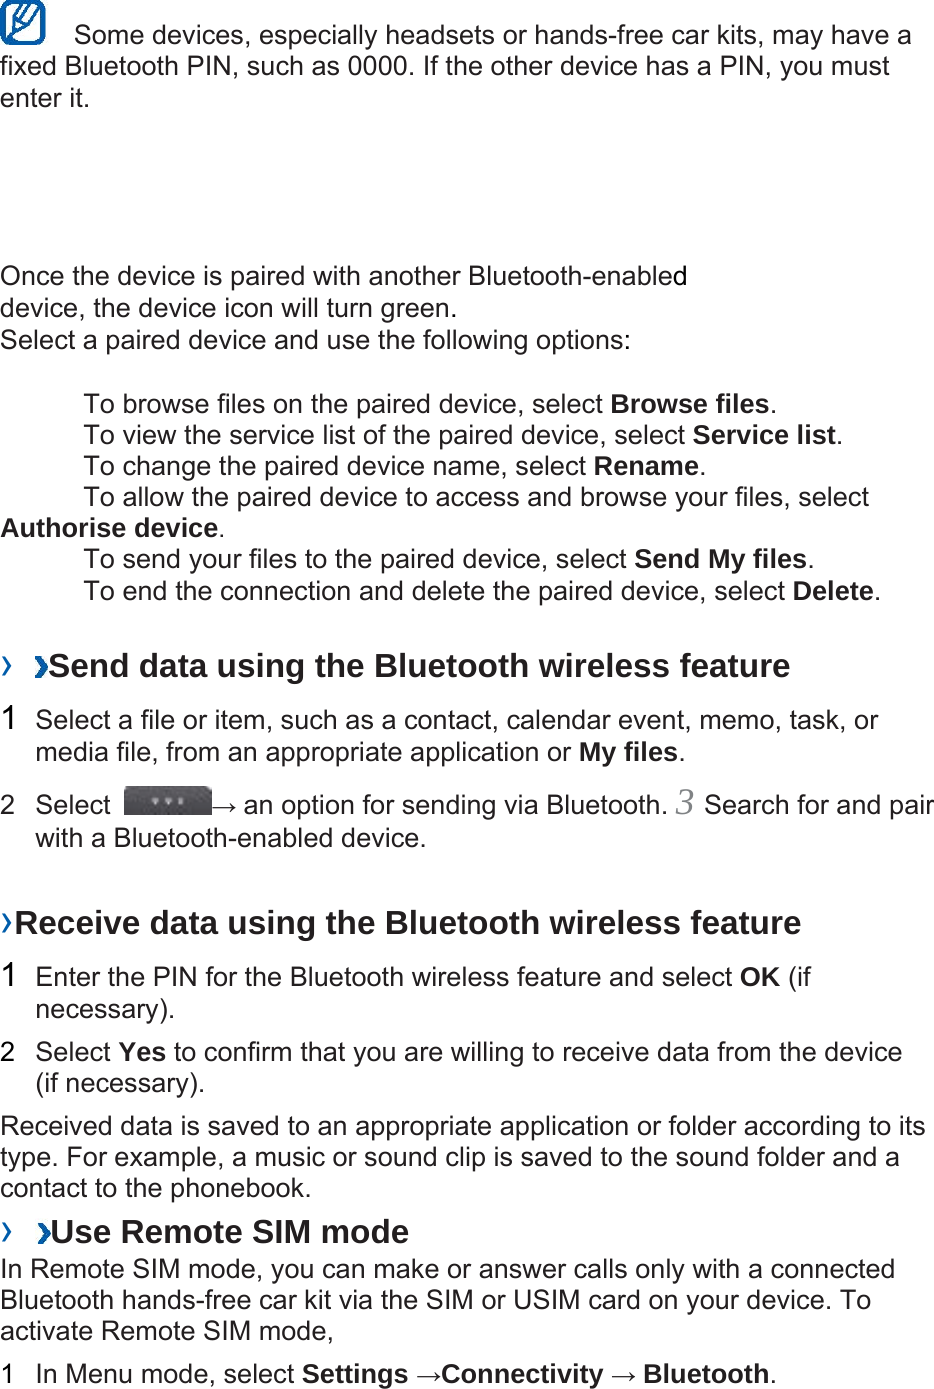   Some devices, especially headsets or hands-free car kits, may have a fixed Bluetooth PIN, such as 0000. If the other device has a PIN, you must enter it.   Once the device is paired with another Bluetooth-enabled device, the device icon will turn green. Select a paired device and use the following options:    To browse files on the paired device, select Browse files.    To view the service list of the paired device, select Service list.    To change the paired device name, select Rename.   To allow the paired device to access and browse your files, select Authorise device.    To send your files to the paired device, select Send My files.    To end the connection and delete the paired device, select Delete.   ›  Send data using the Bluetooth wireless feature   1  Select a file or item, such as a contact, calendar event, memo, task, or media file, from an appropriate application or My files.  2 Select  → an option for sending via Bluetooth. 3 Search for and pair with a Bluetooth-enabled device.   ›Receive data using the Bluetooth wireless feature   1  Enter the PIN for the Bluetooth wireless feature and select OK (if necessary).  2  Select Yes to confirm that you are willing to receive data from the device (if necessary).   Received data is saved to an appropriate application or folder according to its type. For example, a music or sound clip is saved to the sound folder and a contact to the phonebook.   ›  Use Remote SIM mode   In Remote SIM mode, you can make or answer calls only with a connected Bluetooth hands-free car kit via the SIM or USIM card on your device. To activate Remote SIM mode,   1  In Menu mode, select Settings →Connectivity → Bluetooth.  